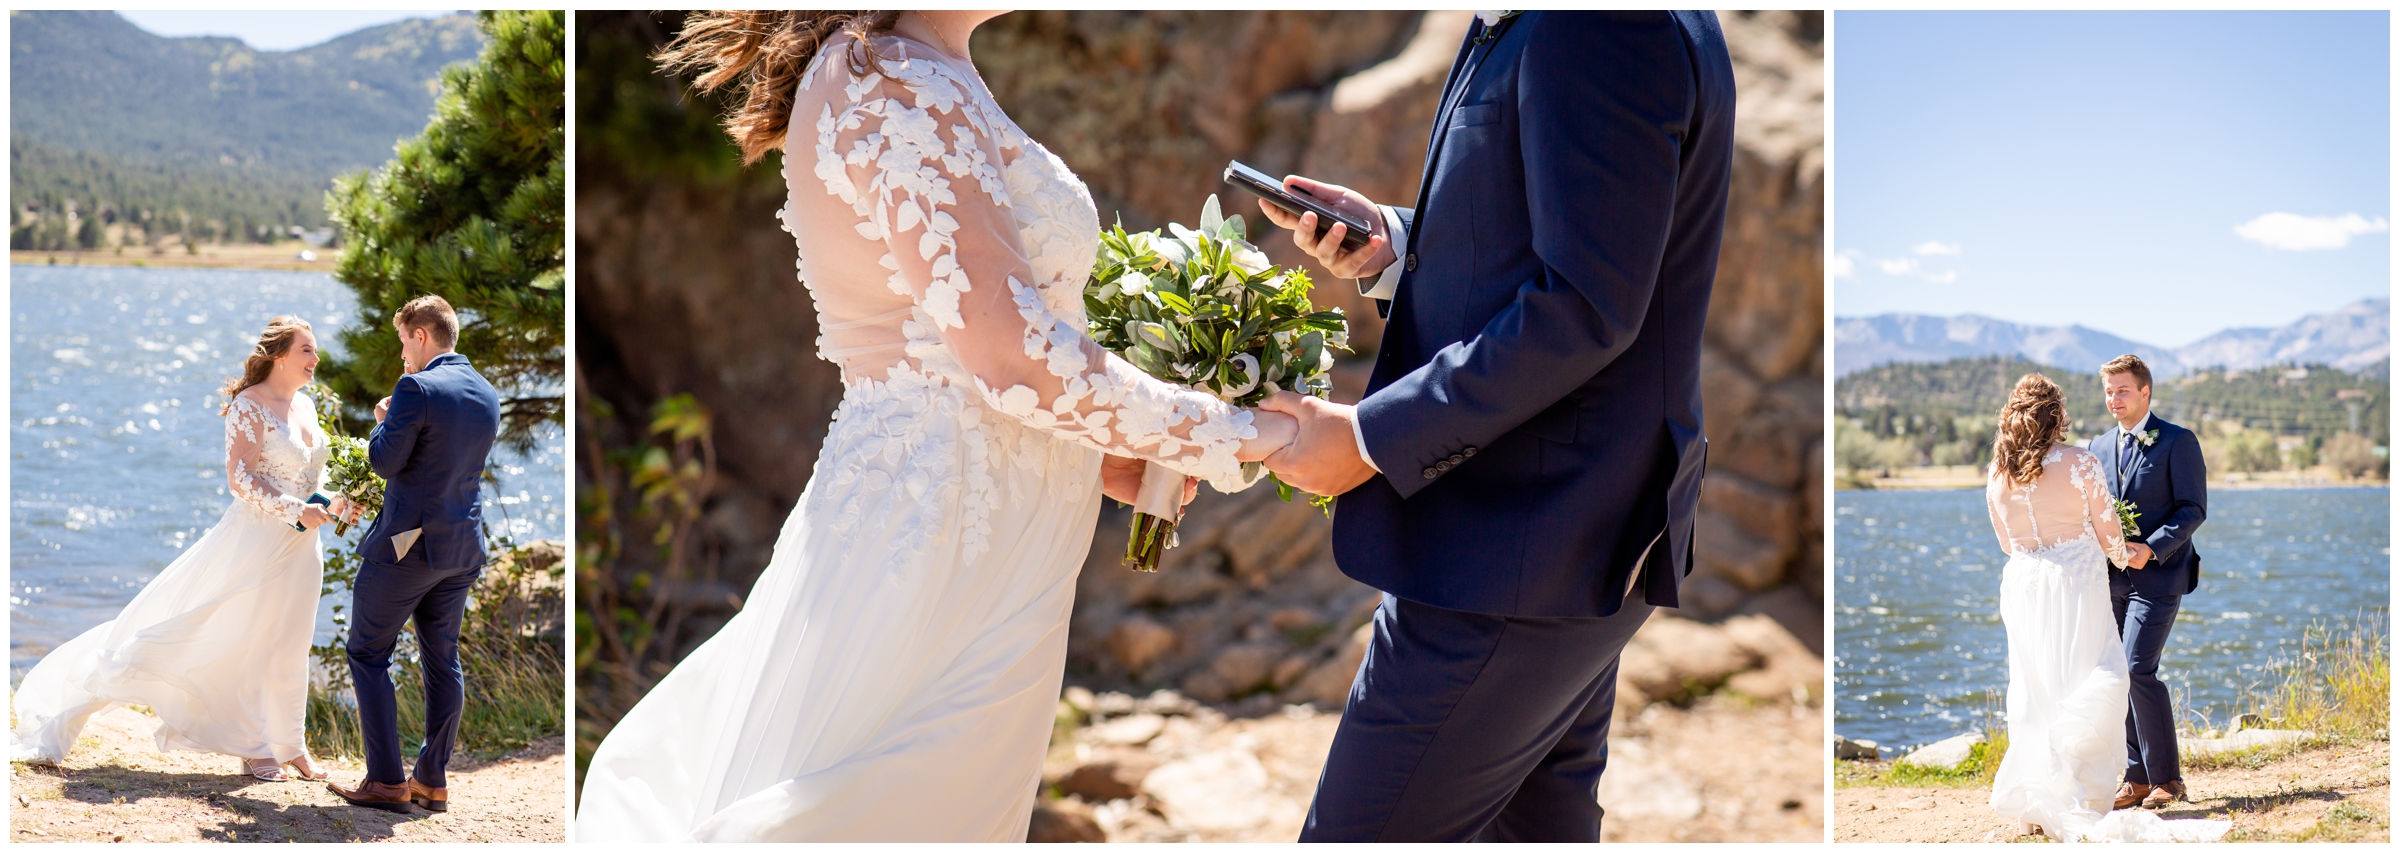 private ceremony at Lake Estes Colorado elopement wedding by Plum pretty photography 